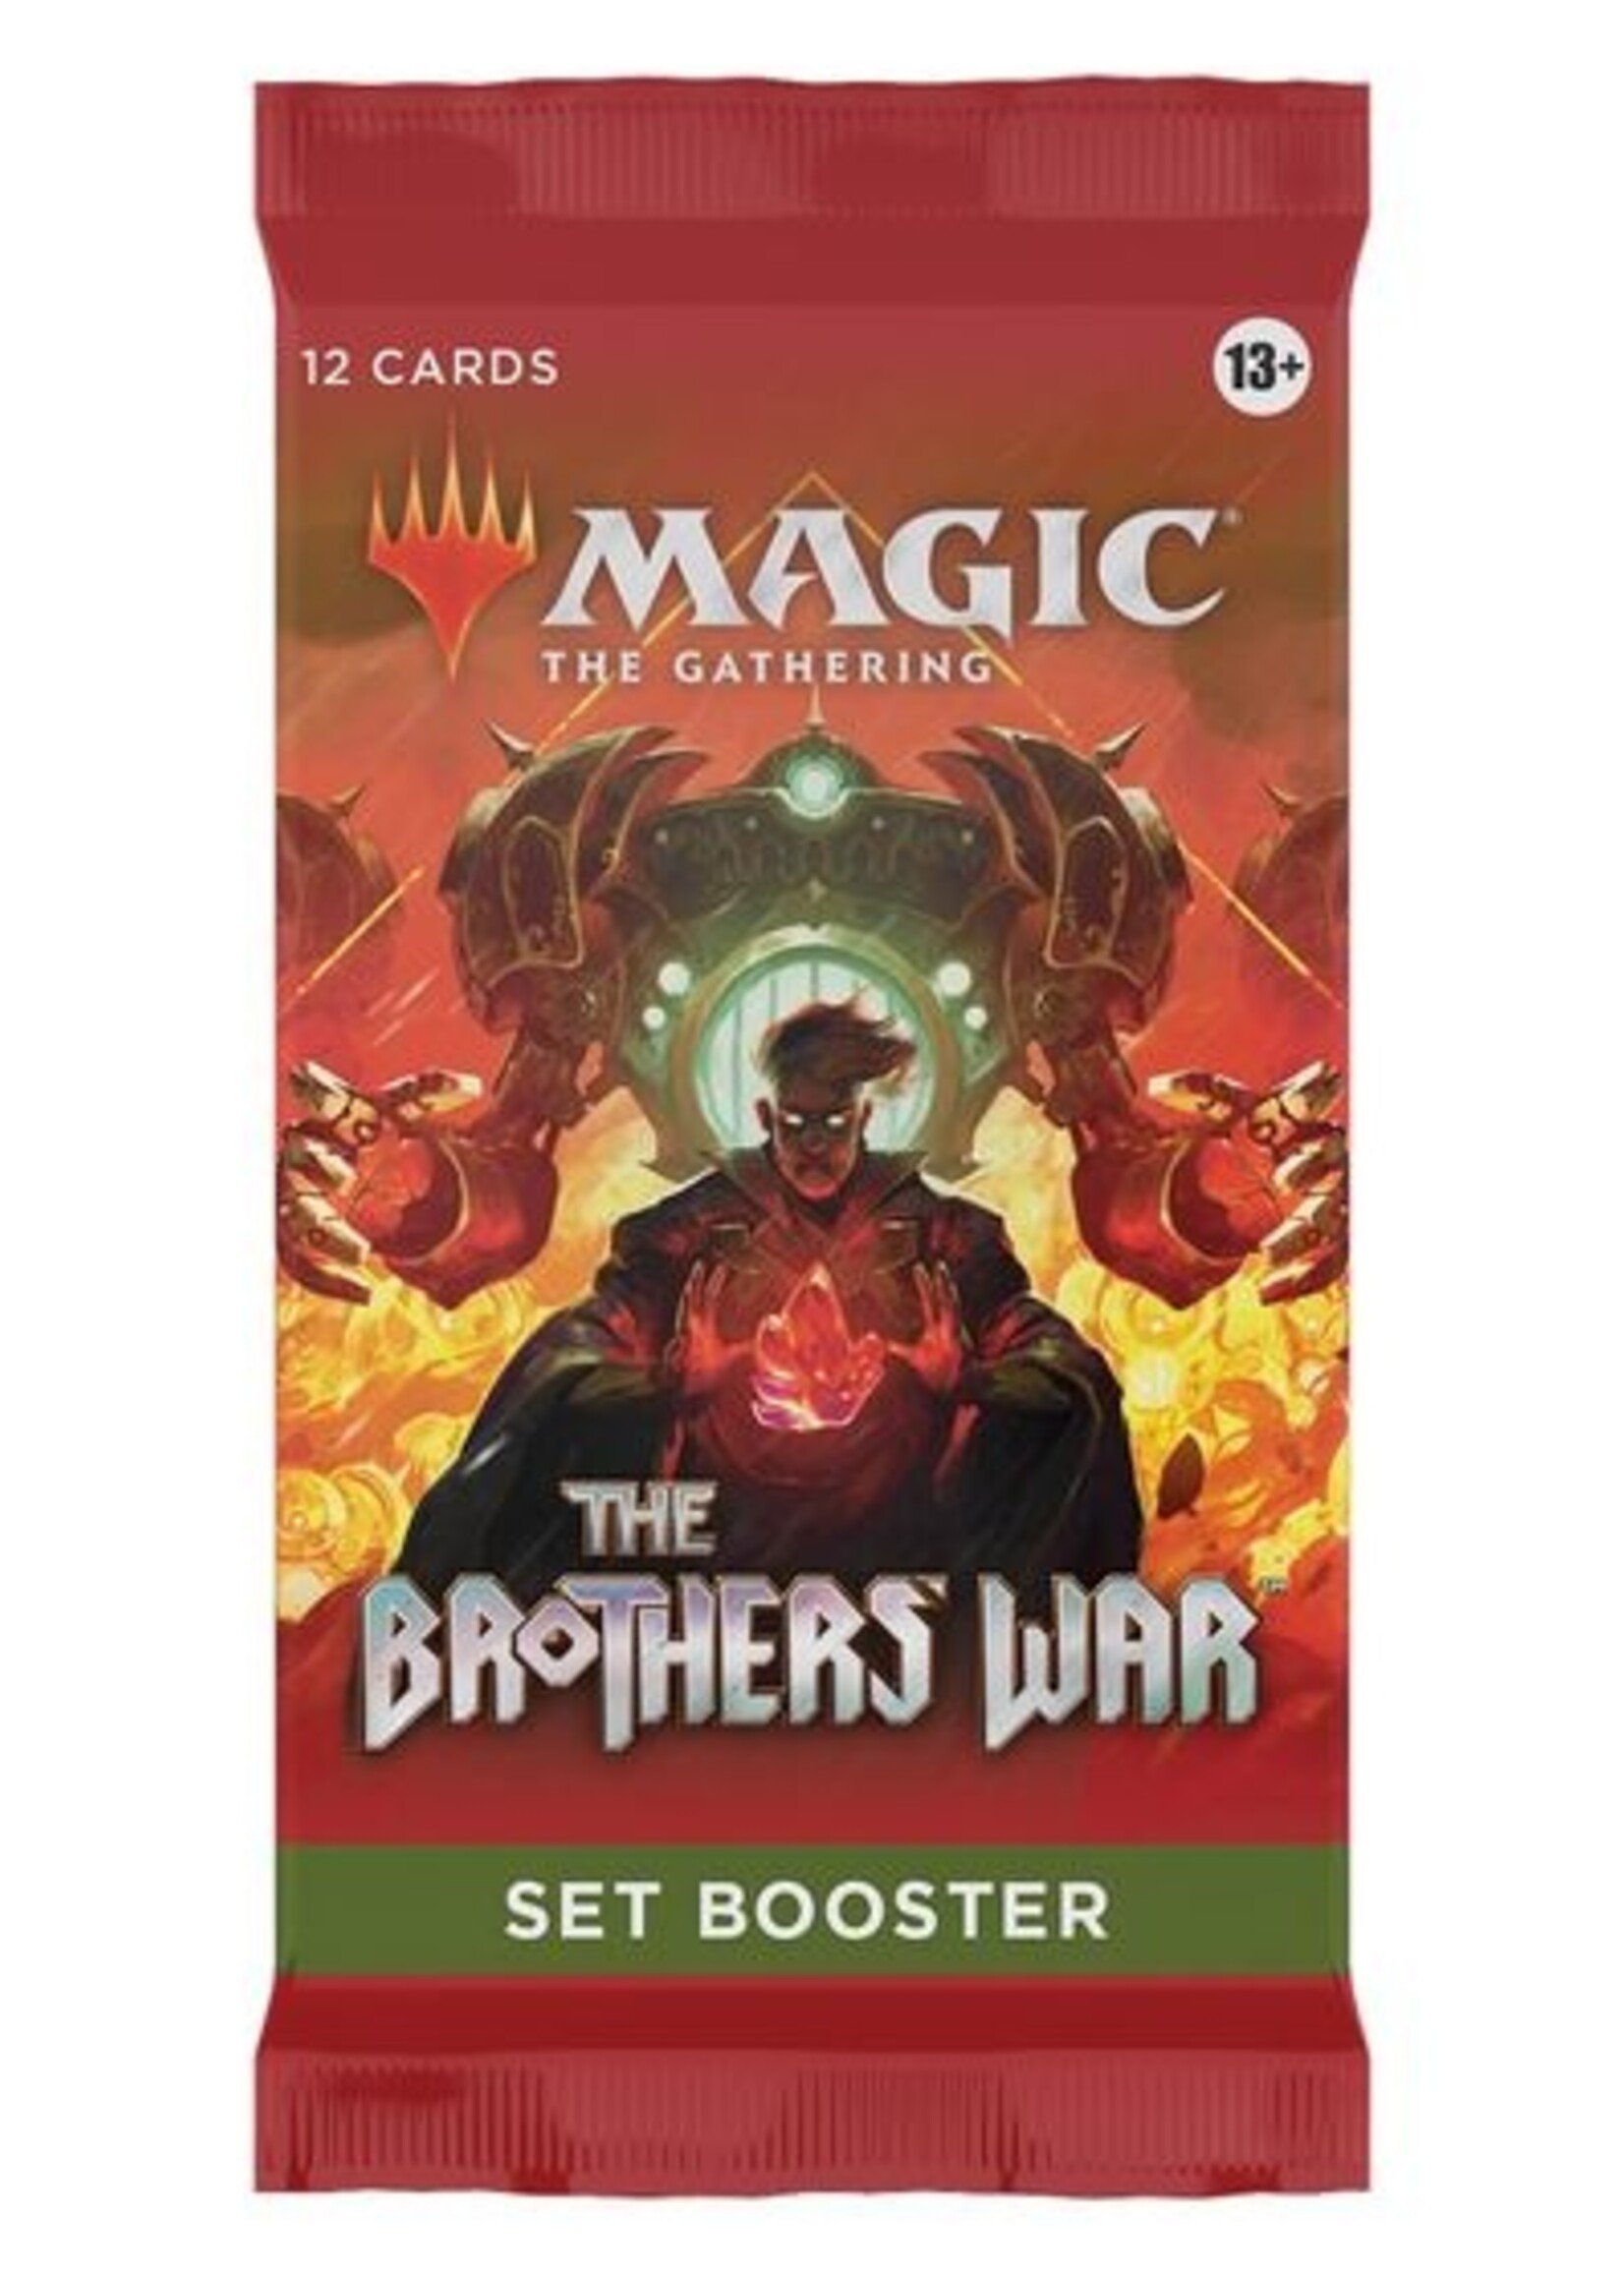 Wizards of the Coast - "The Brothers War" Set Booster